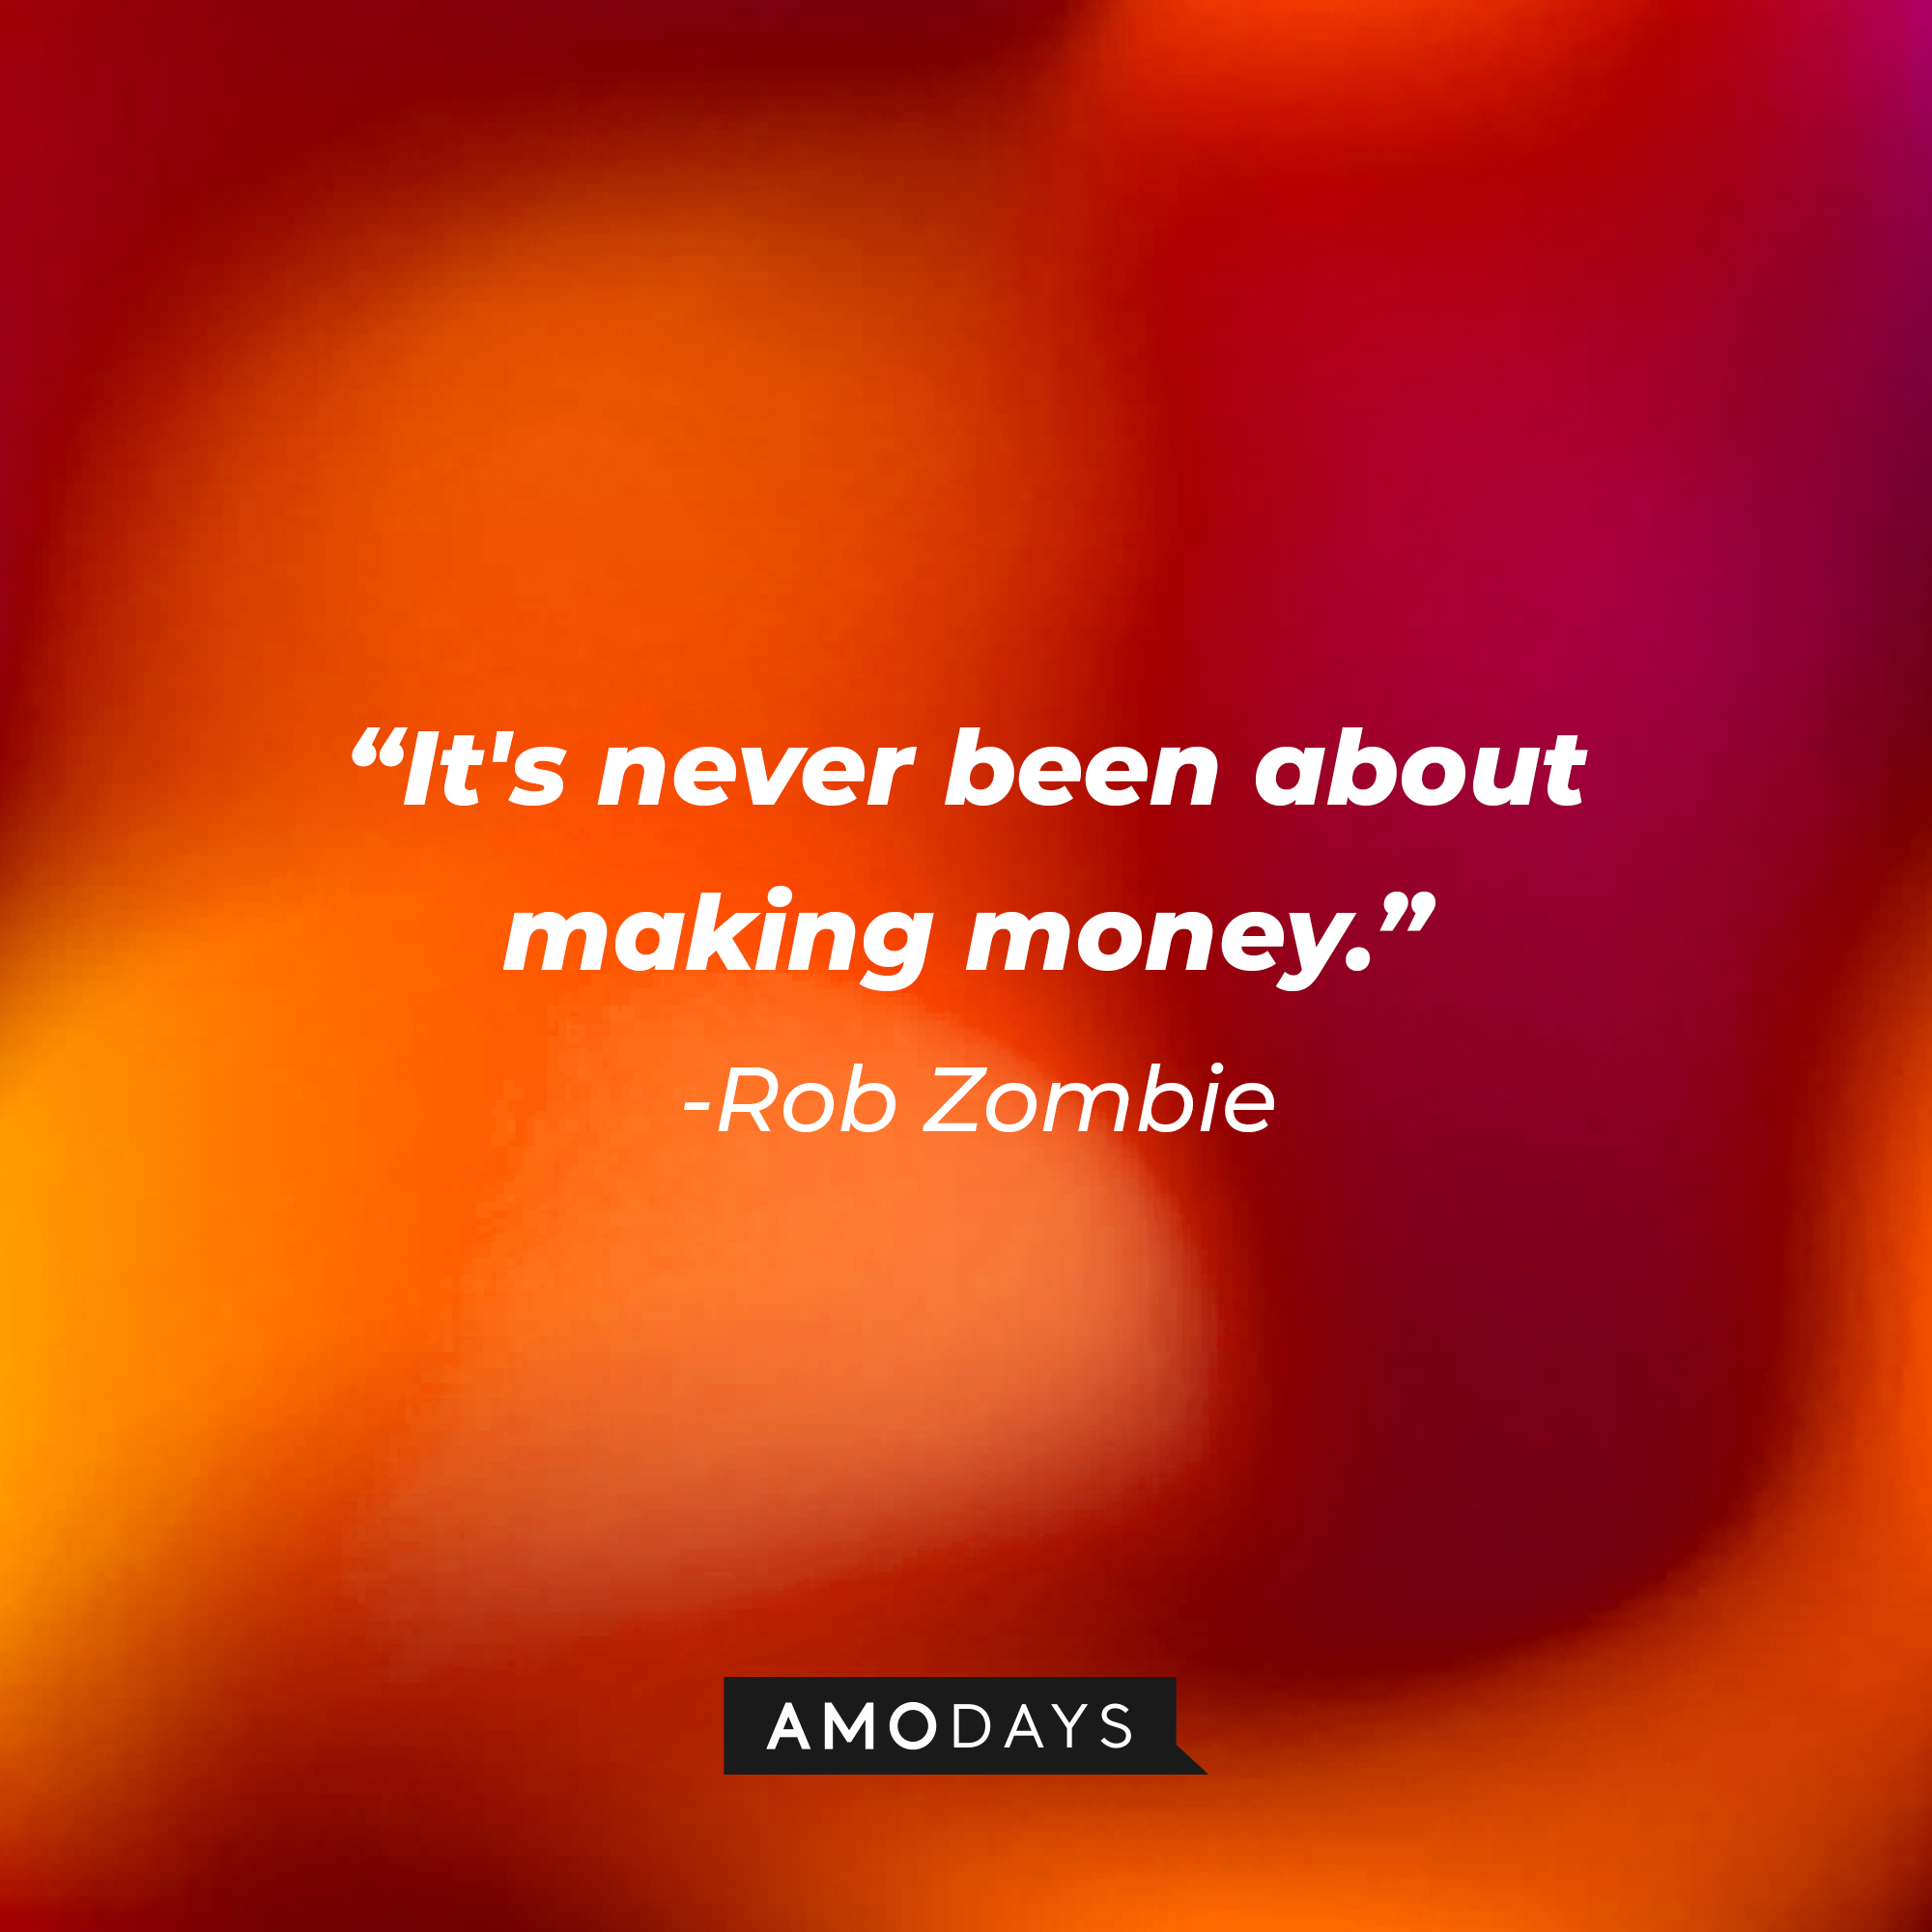 Rob Zombie's quote "It's never been about making money." | Source: AmoDays